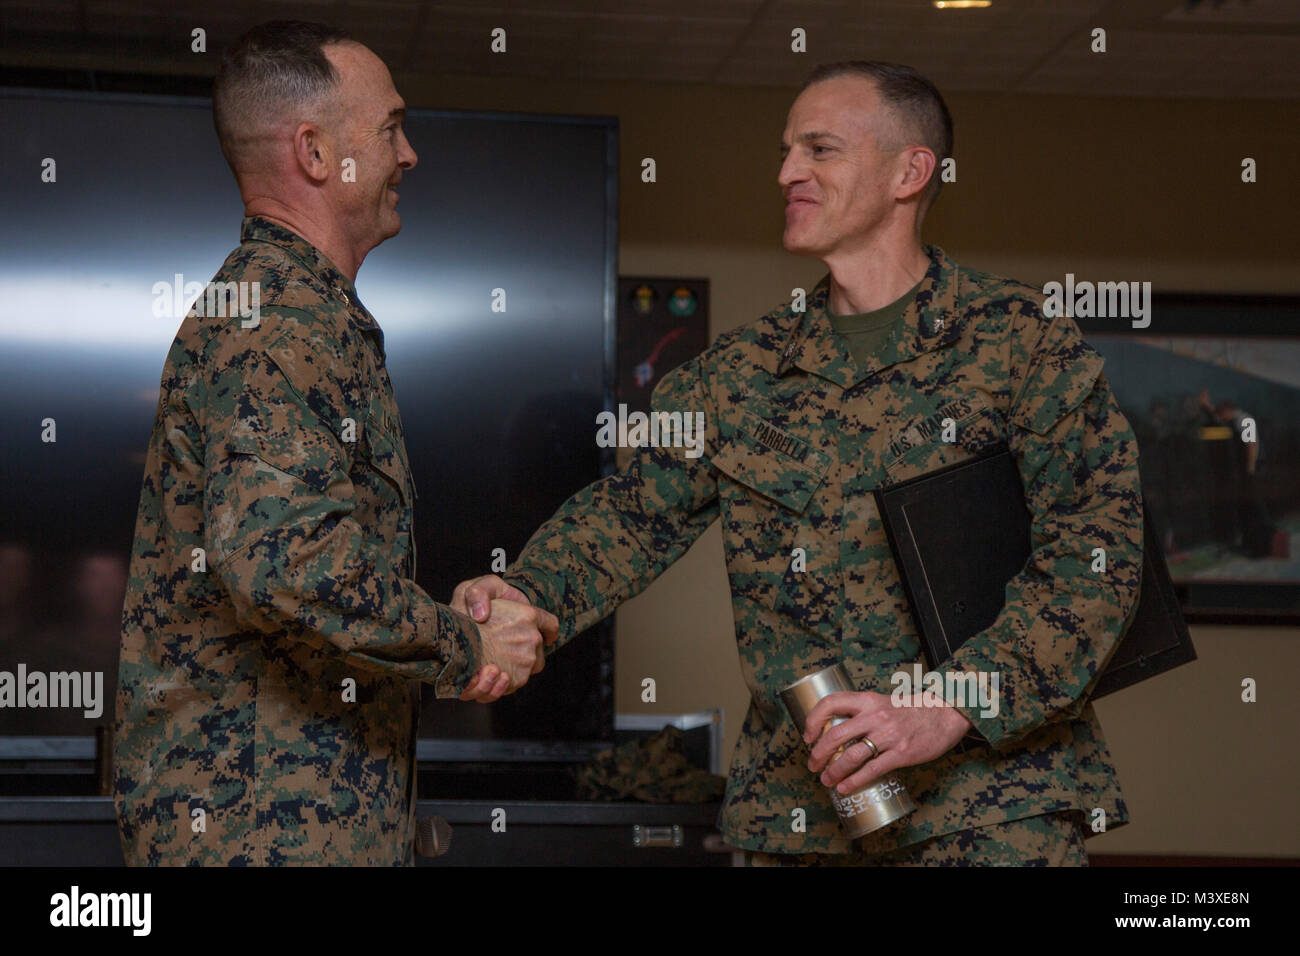 U.S. Marine Corps Maj. Gen. John K. Love, commanding general, 2nd Marine Division (2d MARDIV), left, and Col. Keith A. Parrella shake hands on Camp Lejeune, N.C., Feb. 2, 2018. Parrella was awarded for being the first to complete the 2d MARDIV 50-mile challenge hike, with a time of 7 hours and 30 minutes. (U.S. Marine Corps photo by Lance Cpl. Taylor N. Cooper) Stock Photo